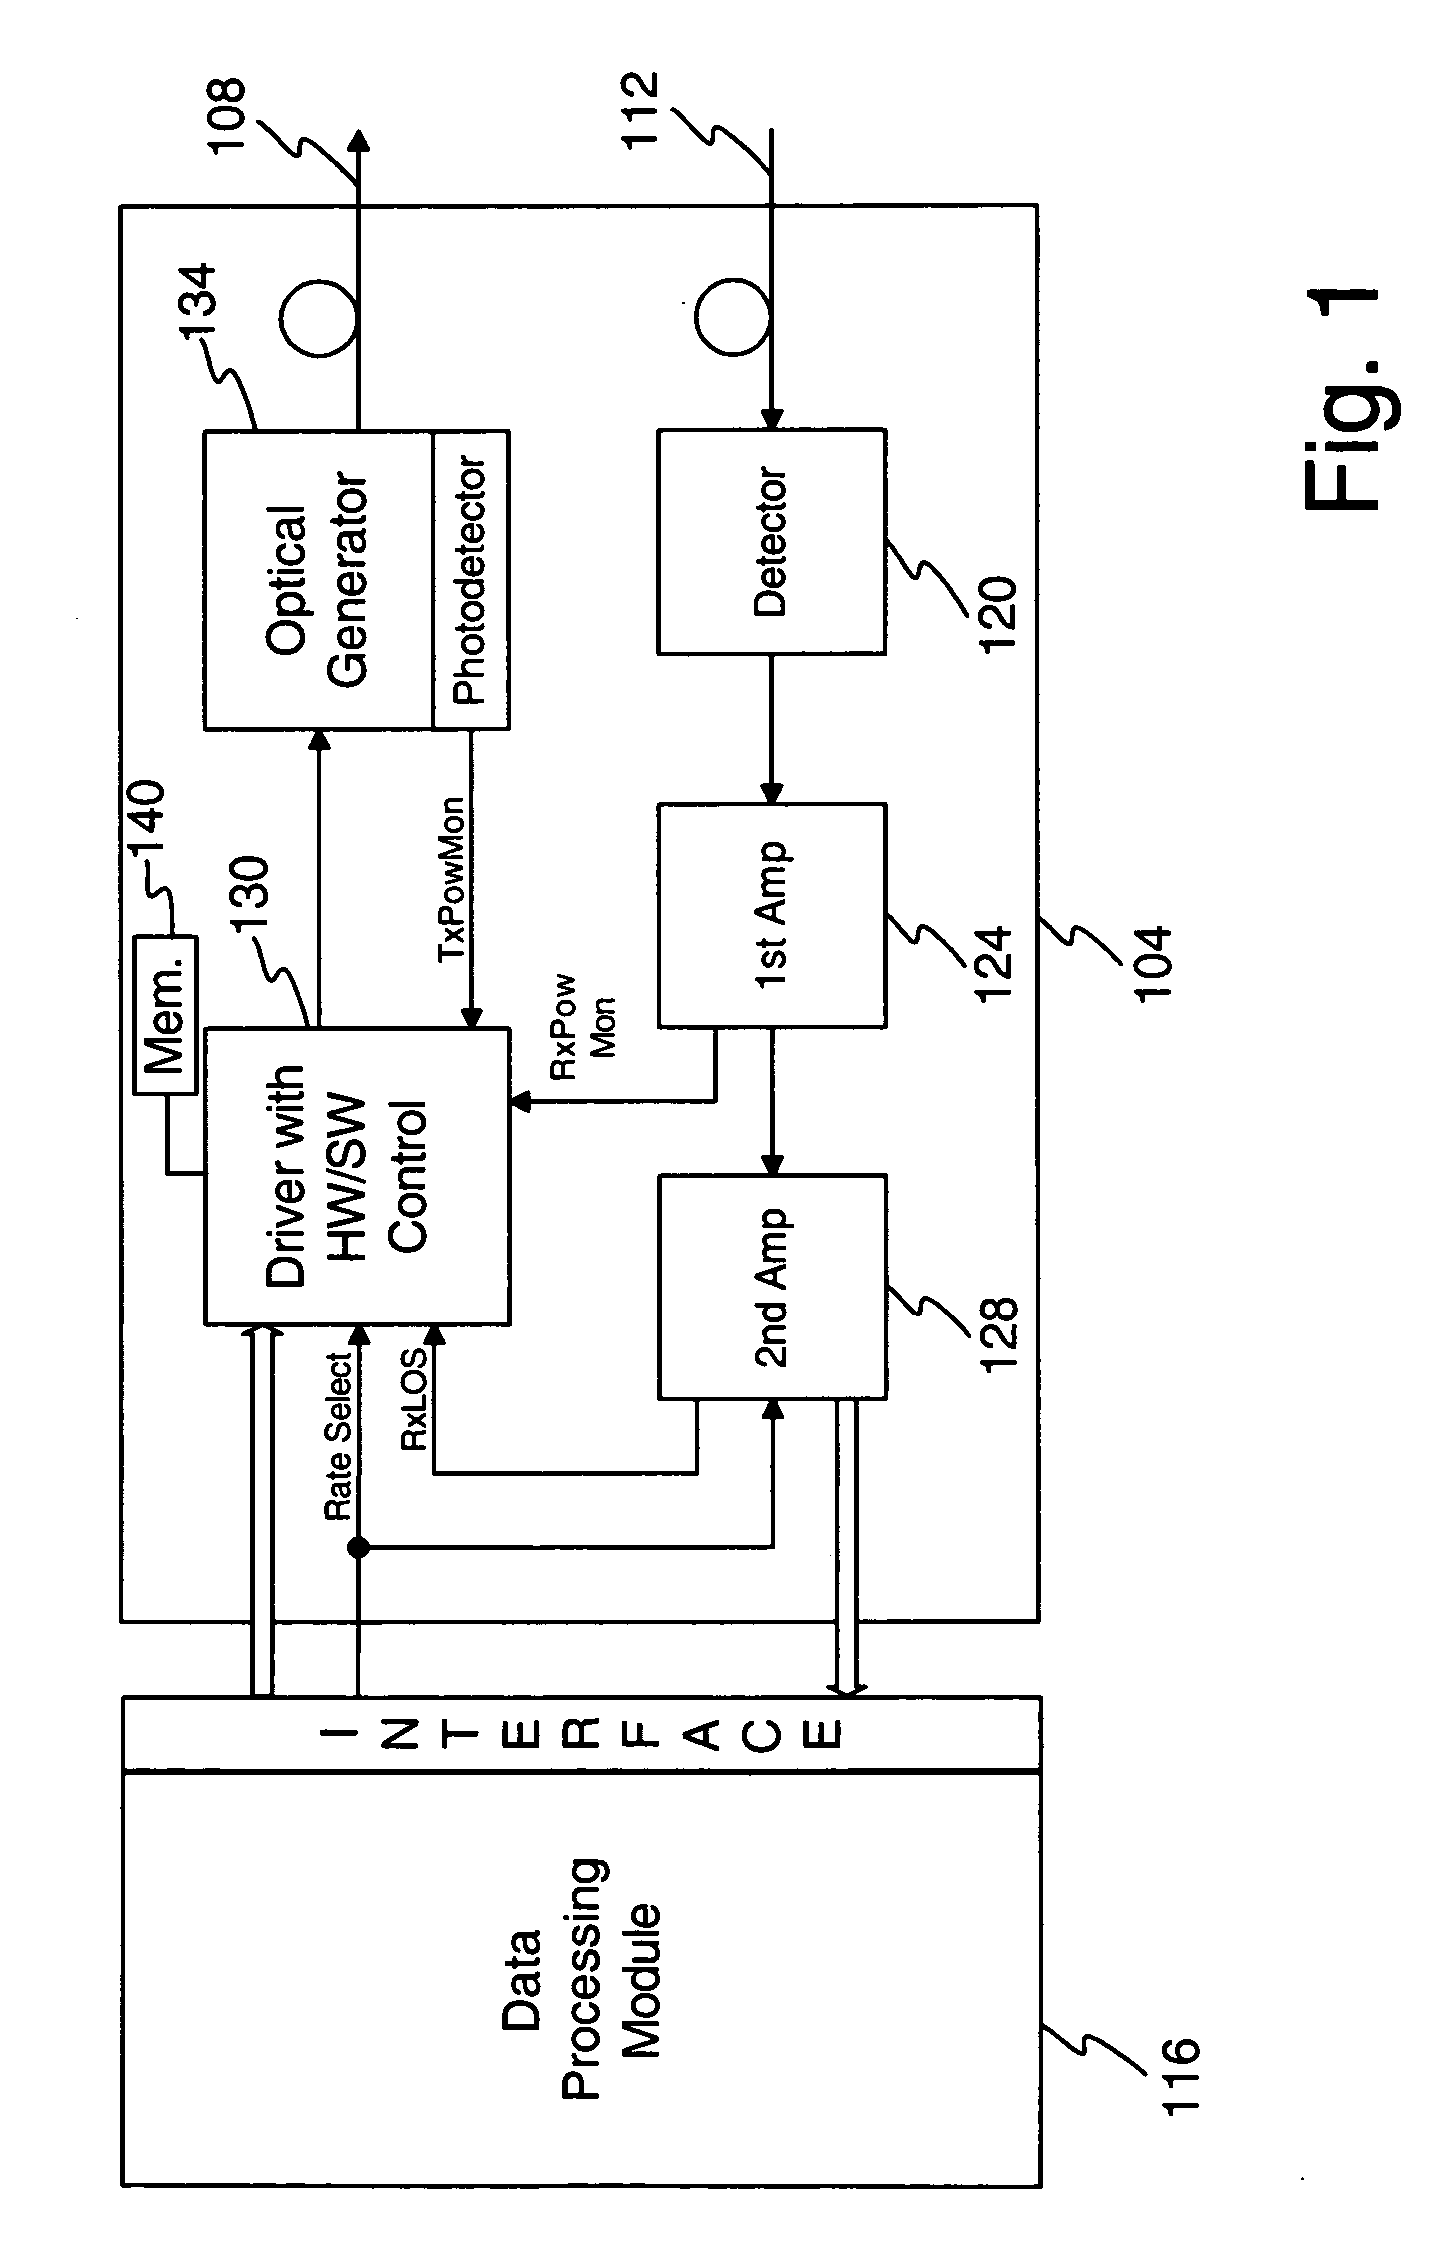 Laser power control with automatic compensation